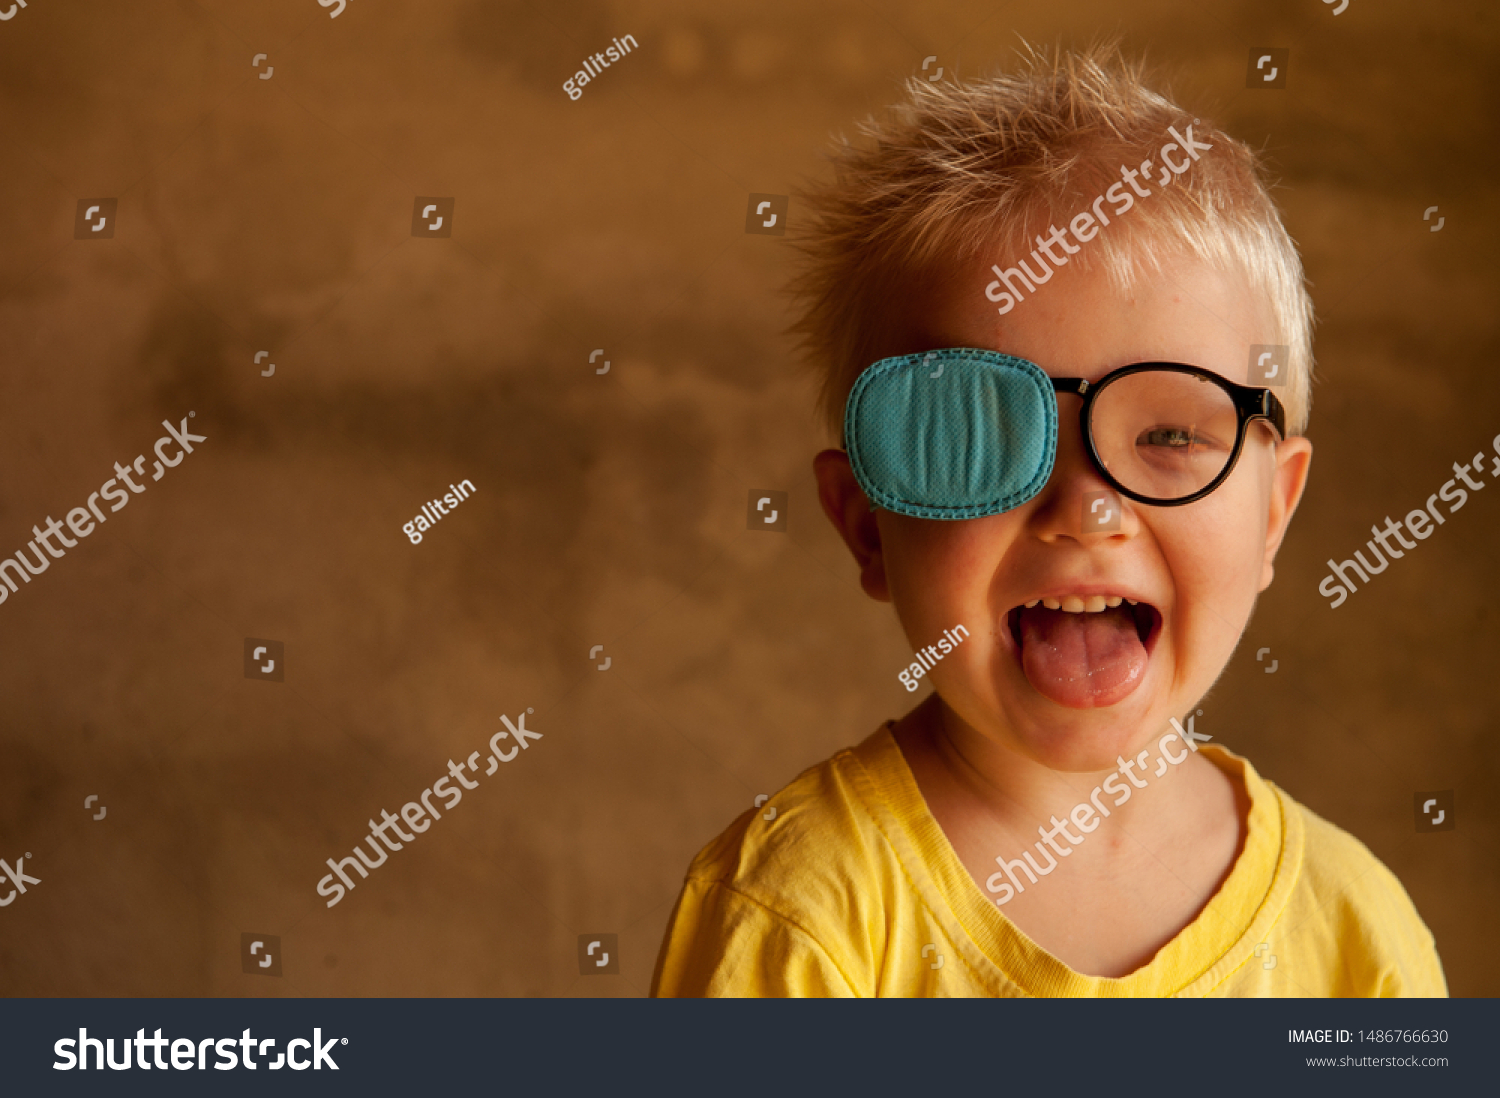 Portrait of funny child in new glasses with patch for correcting squint 
Ortopad Boys Eye Patches nozzle for glasses for treatment of strabismus (lazy eye) #1486766630